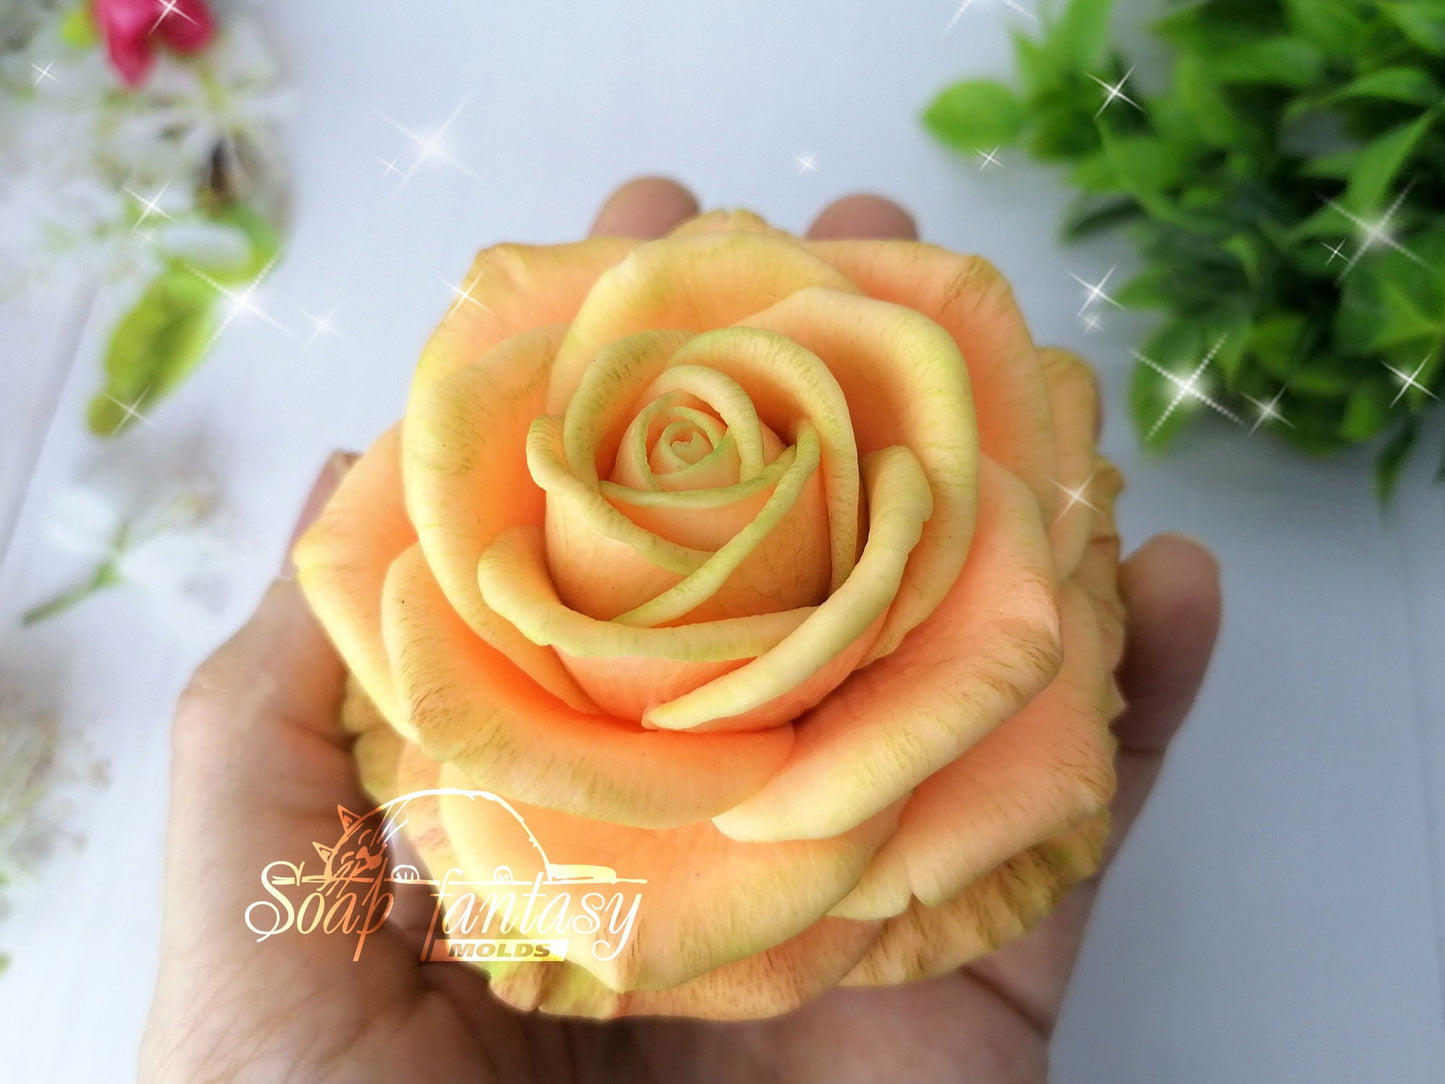 Big rose Symphony silicone mold for soap making